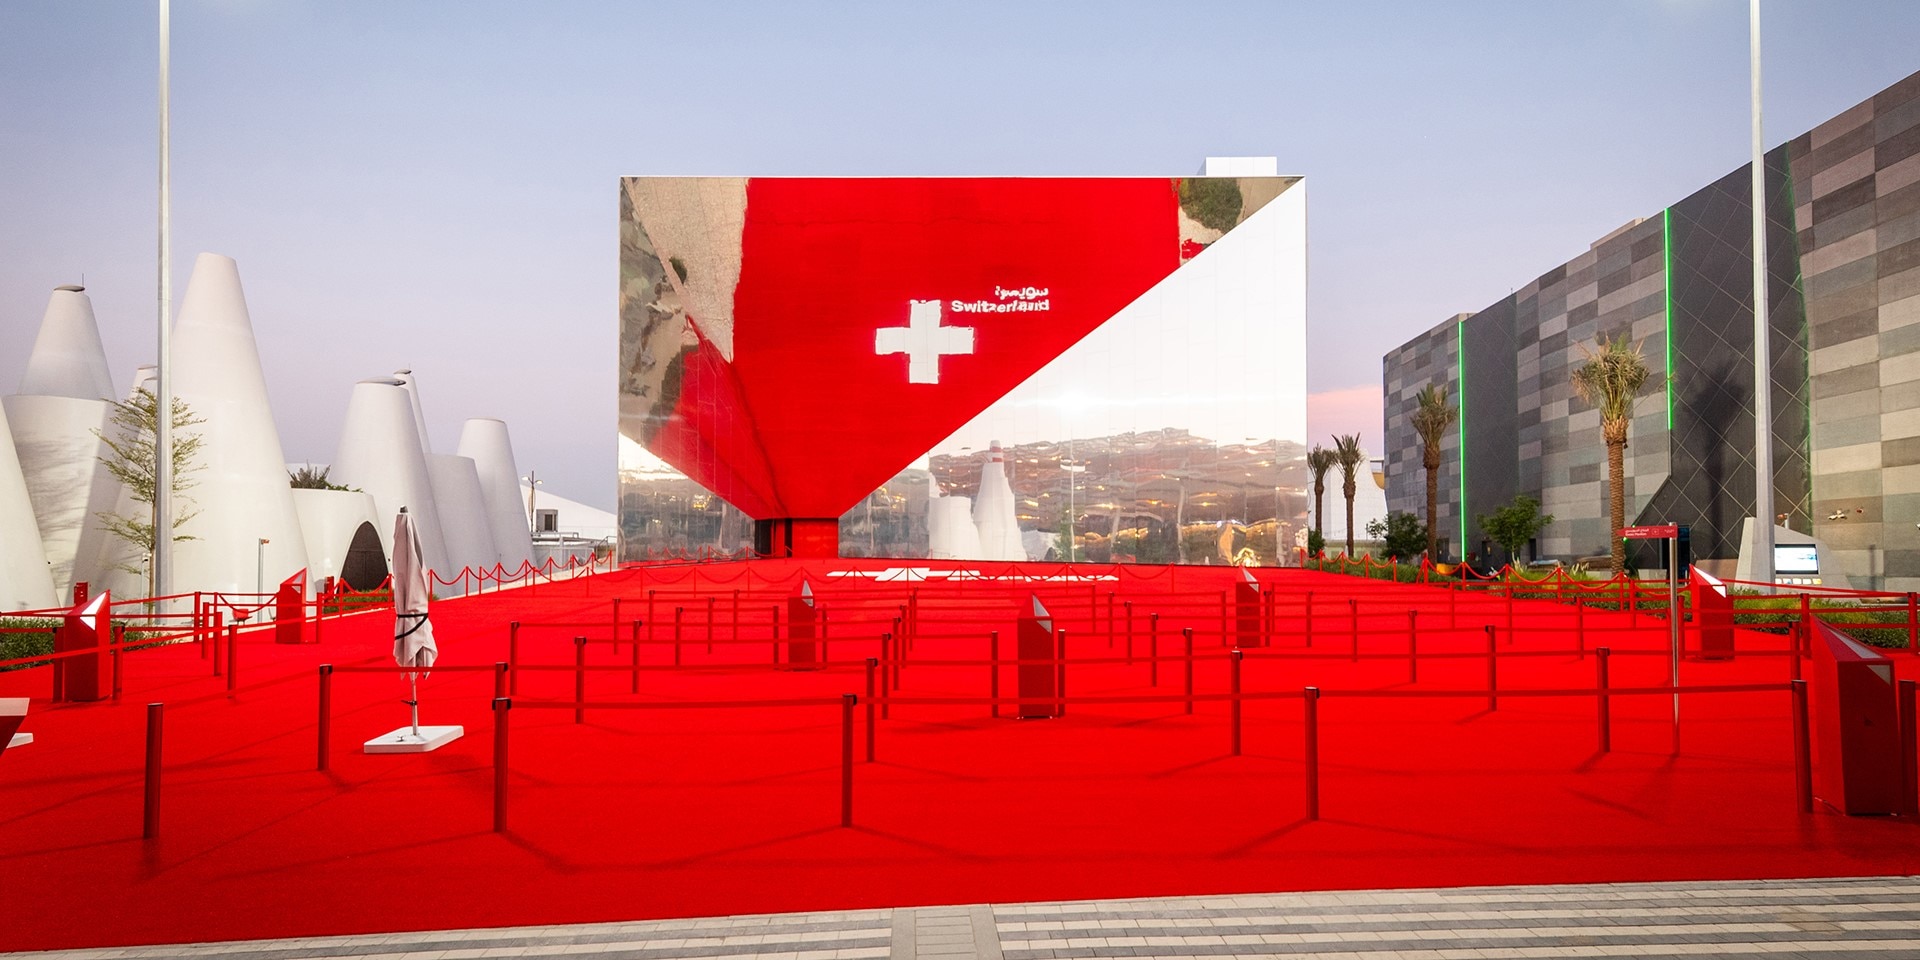 View of the entrance to the Swiss Pavilion